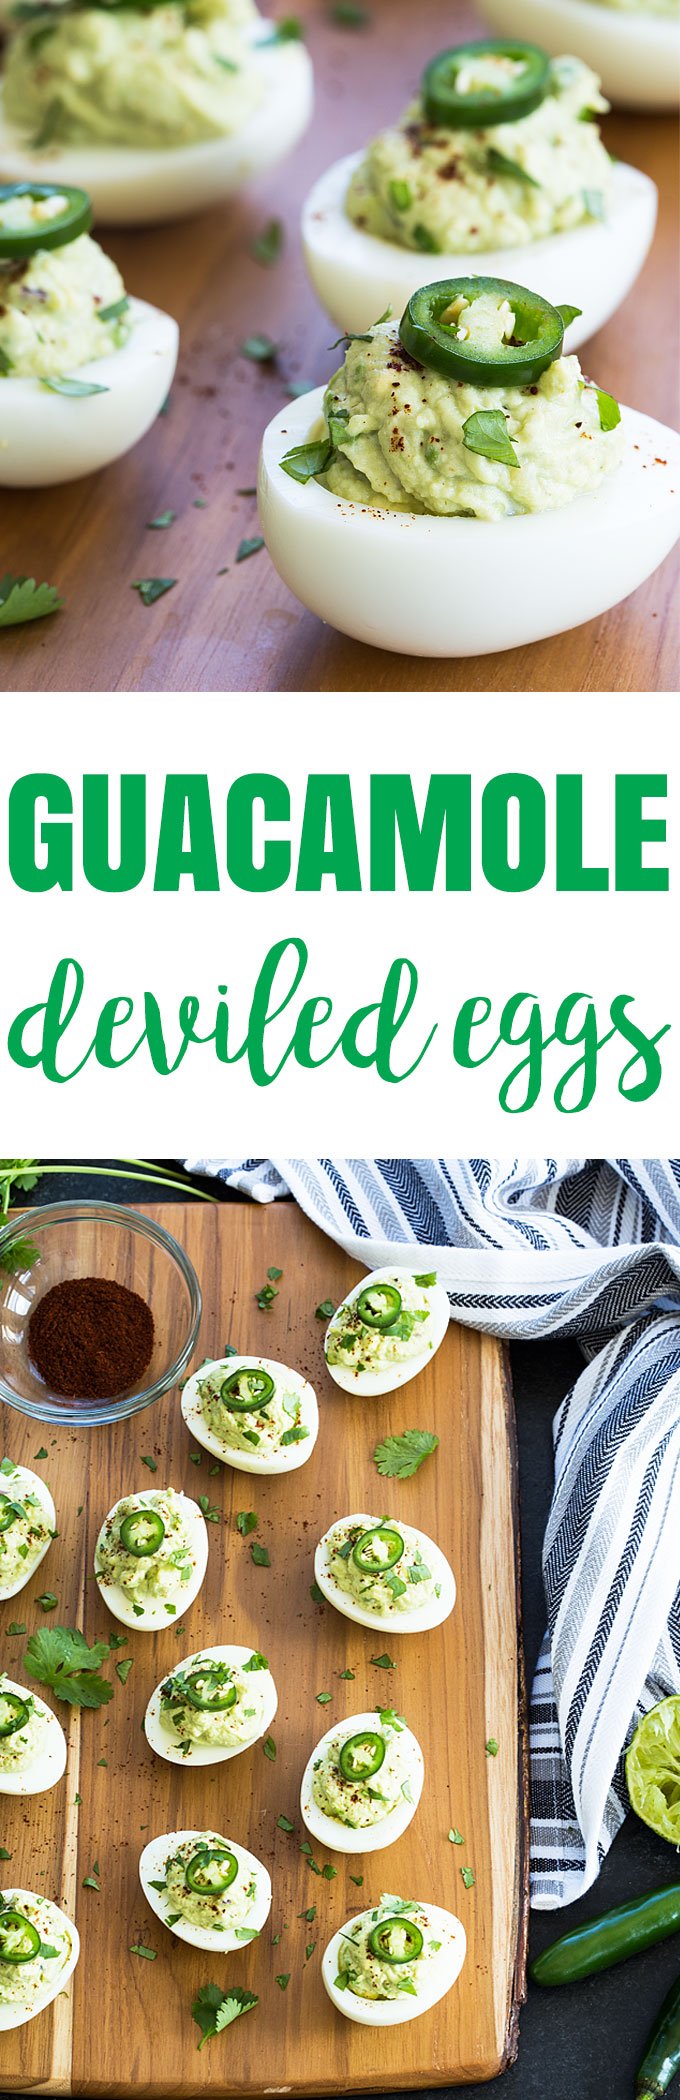 A two image vertical collage of guacamole deviled eggs with overlay text in the center.